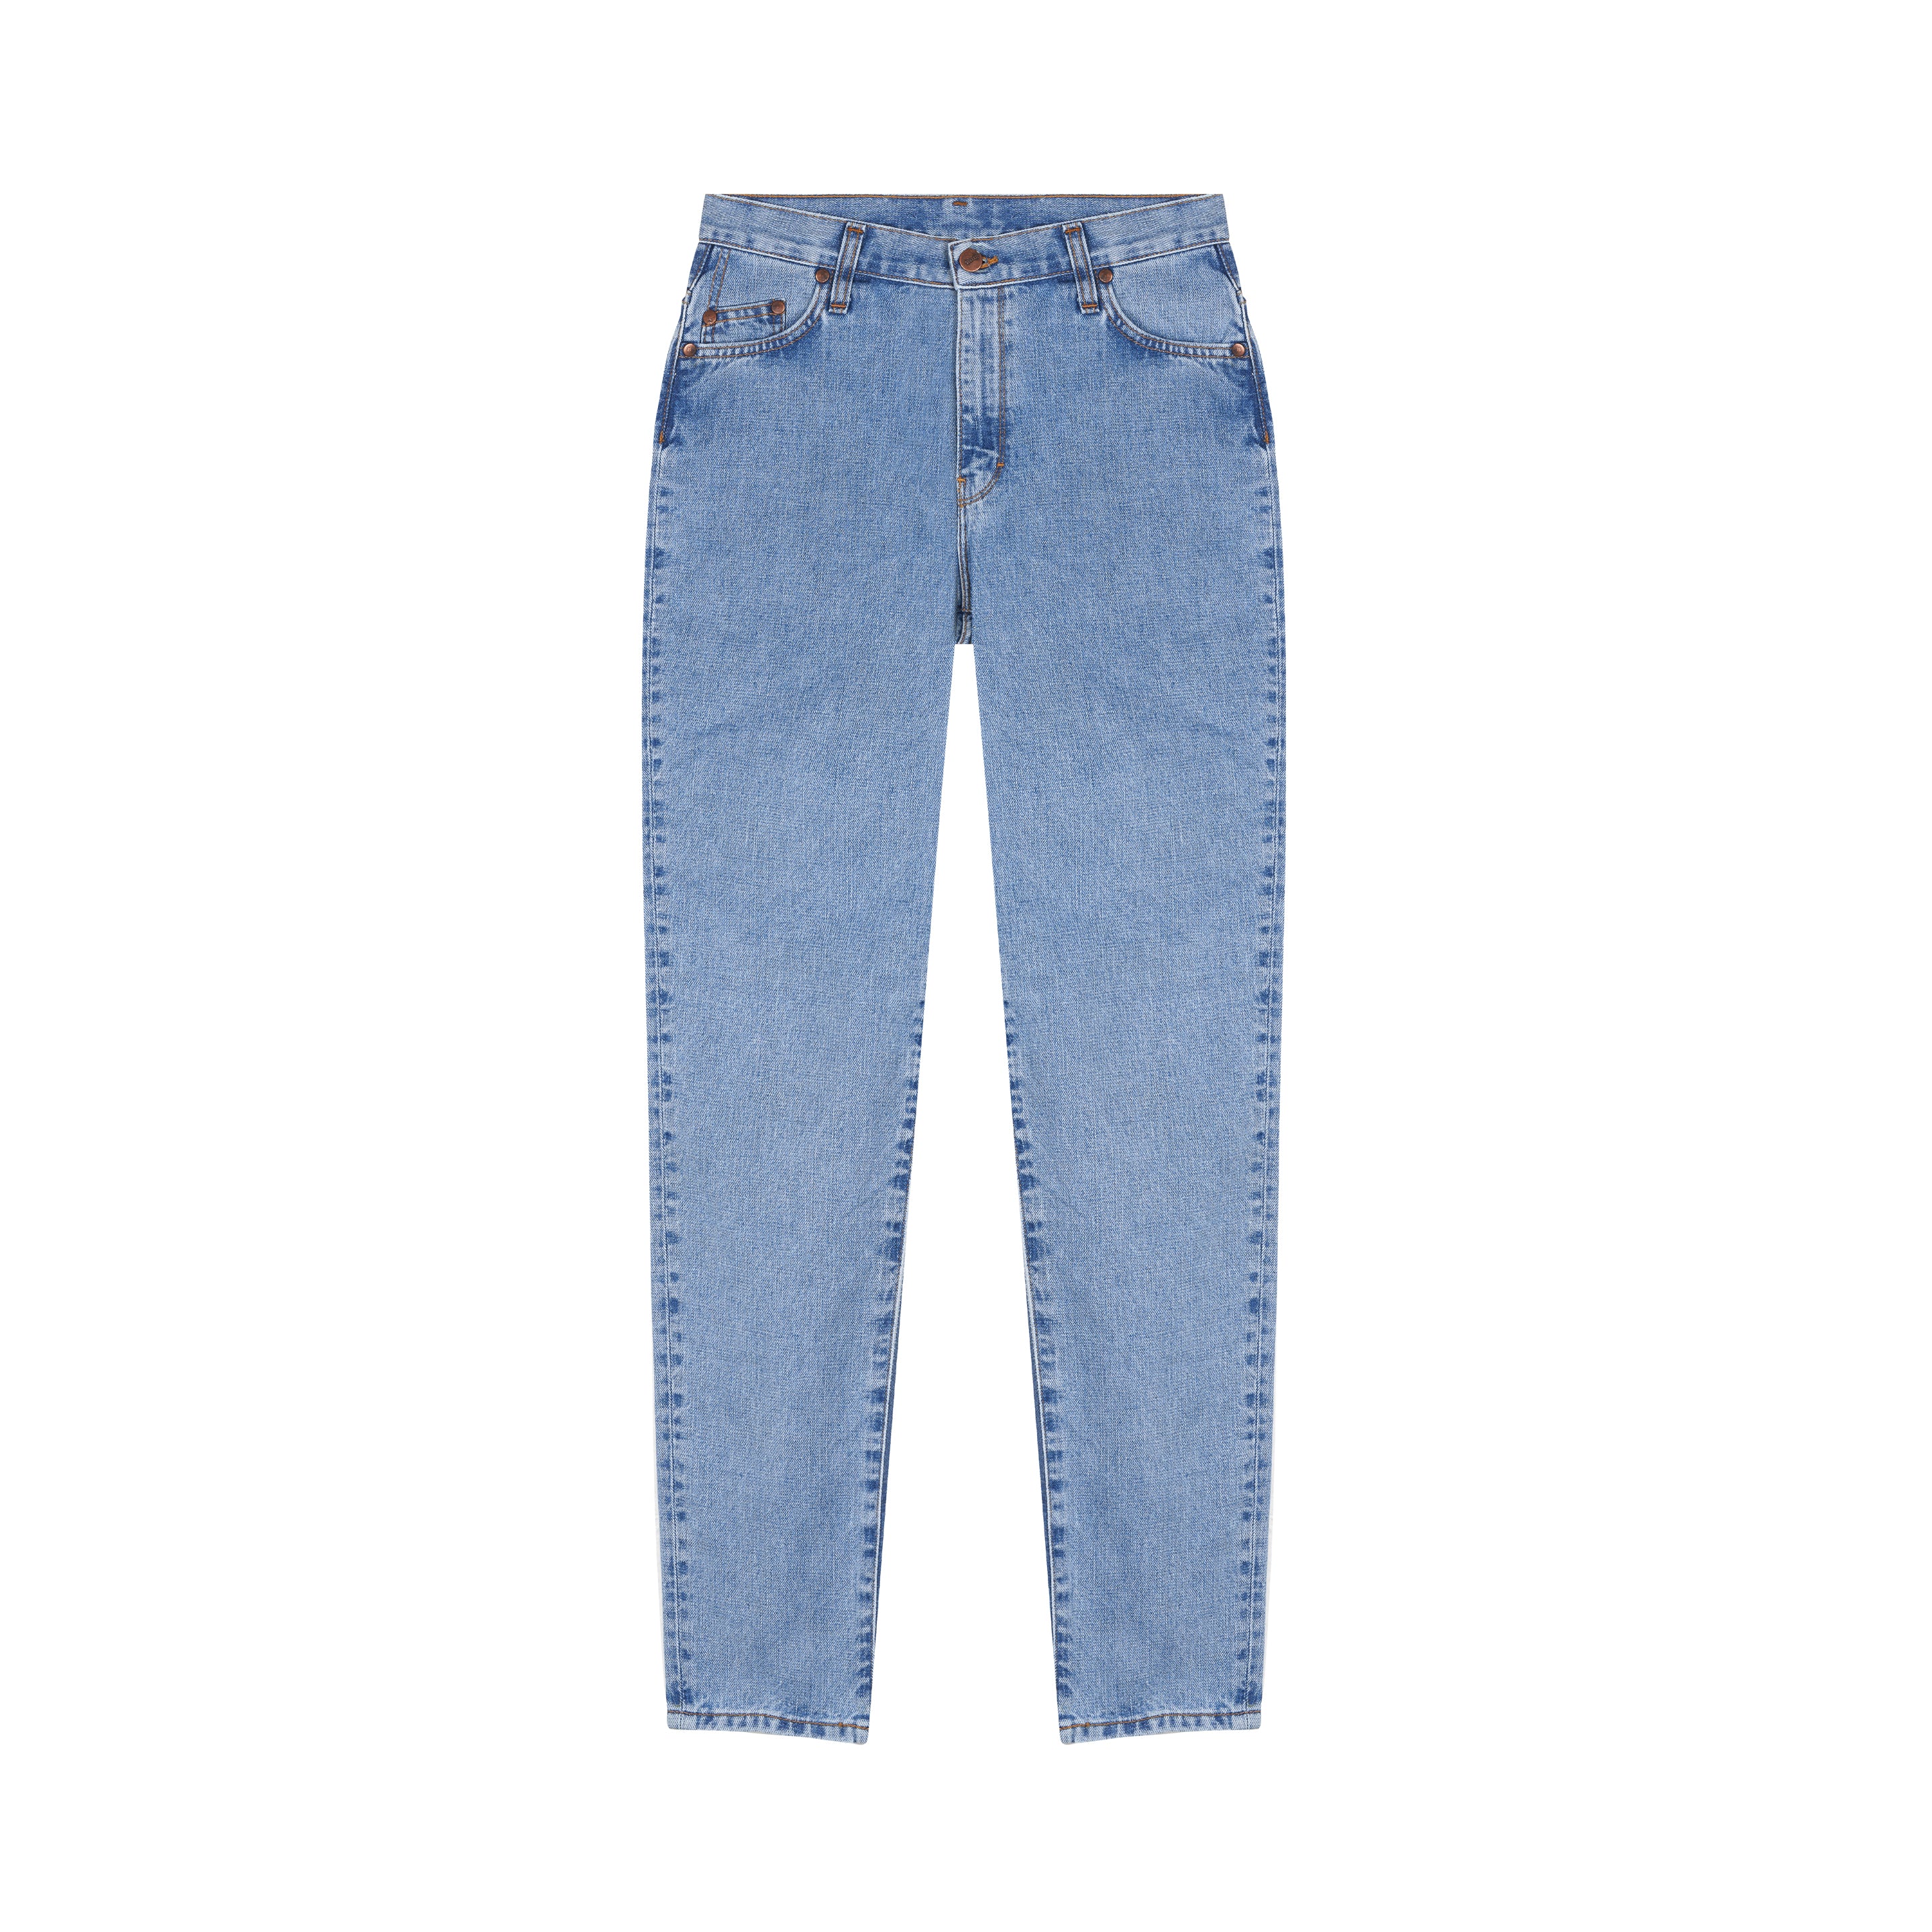 Women's high waisted mom jeans - Made in France – Atelier Tuffery